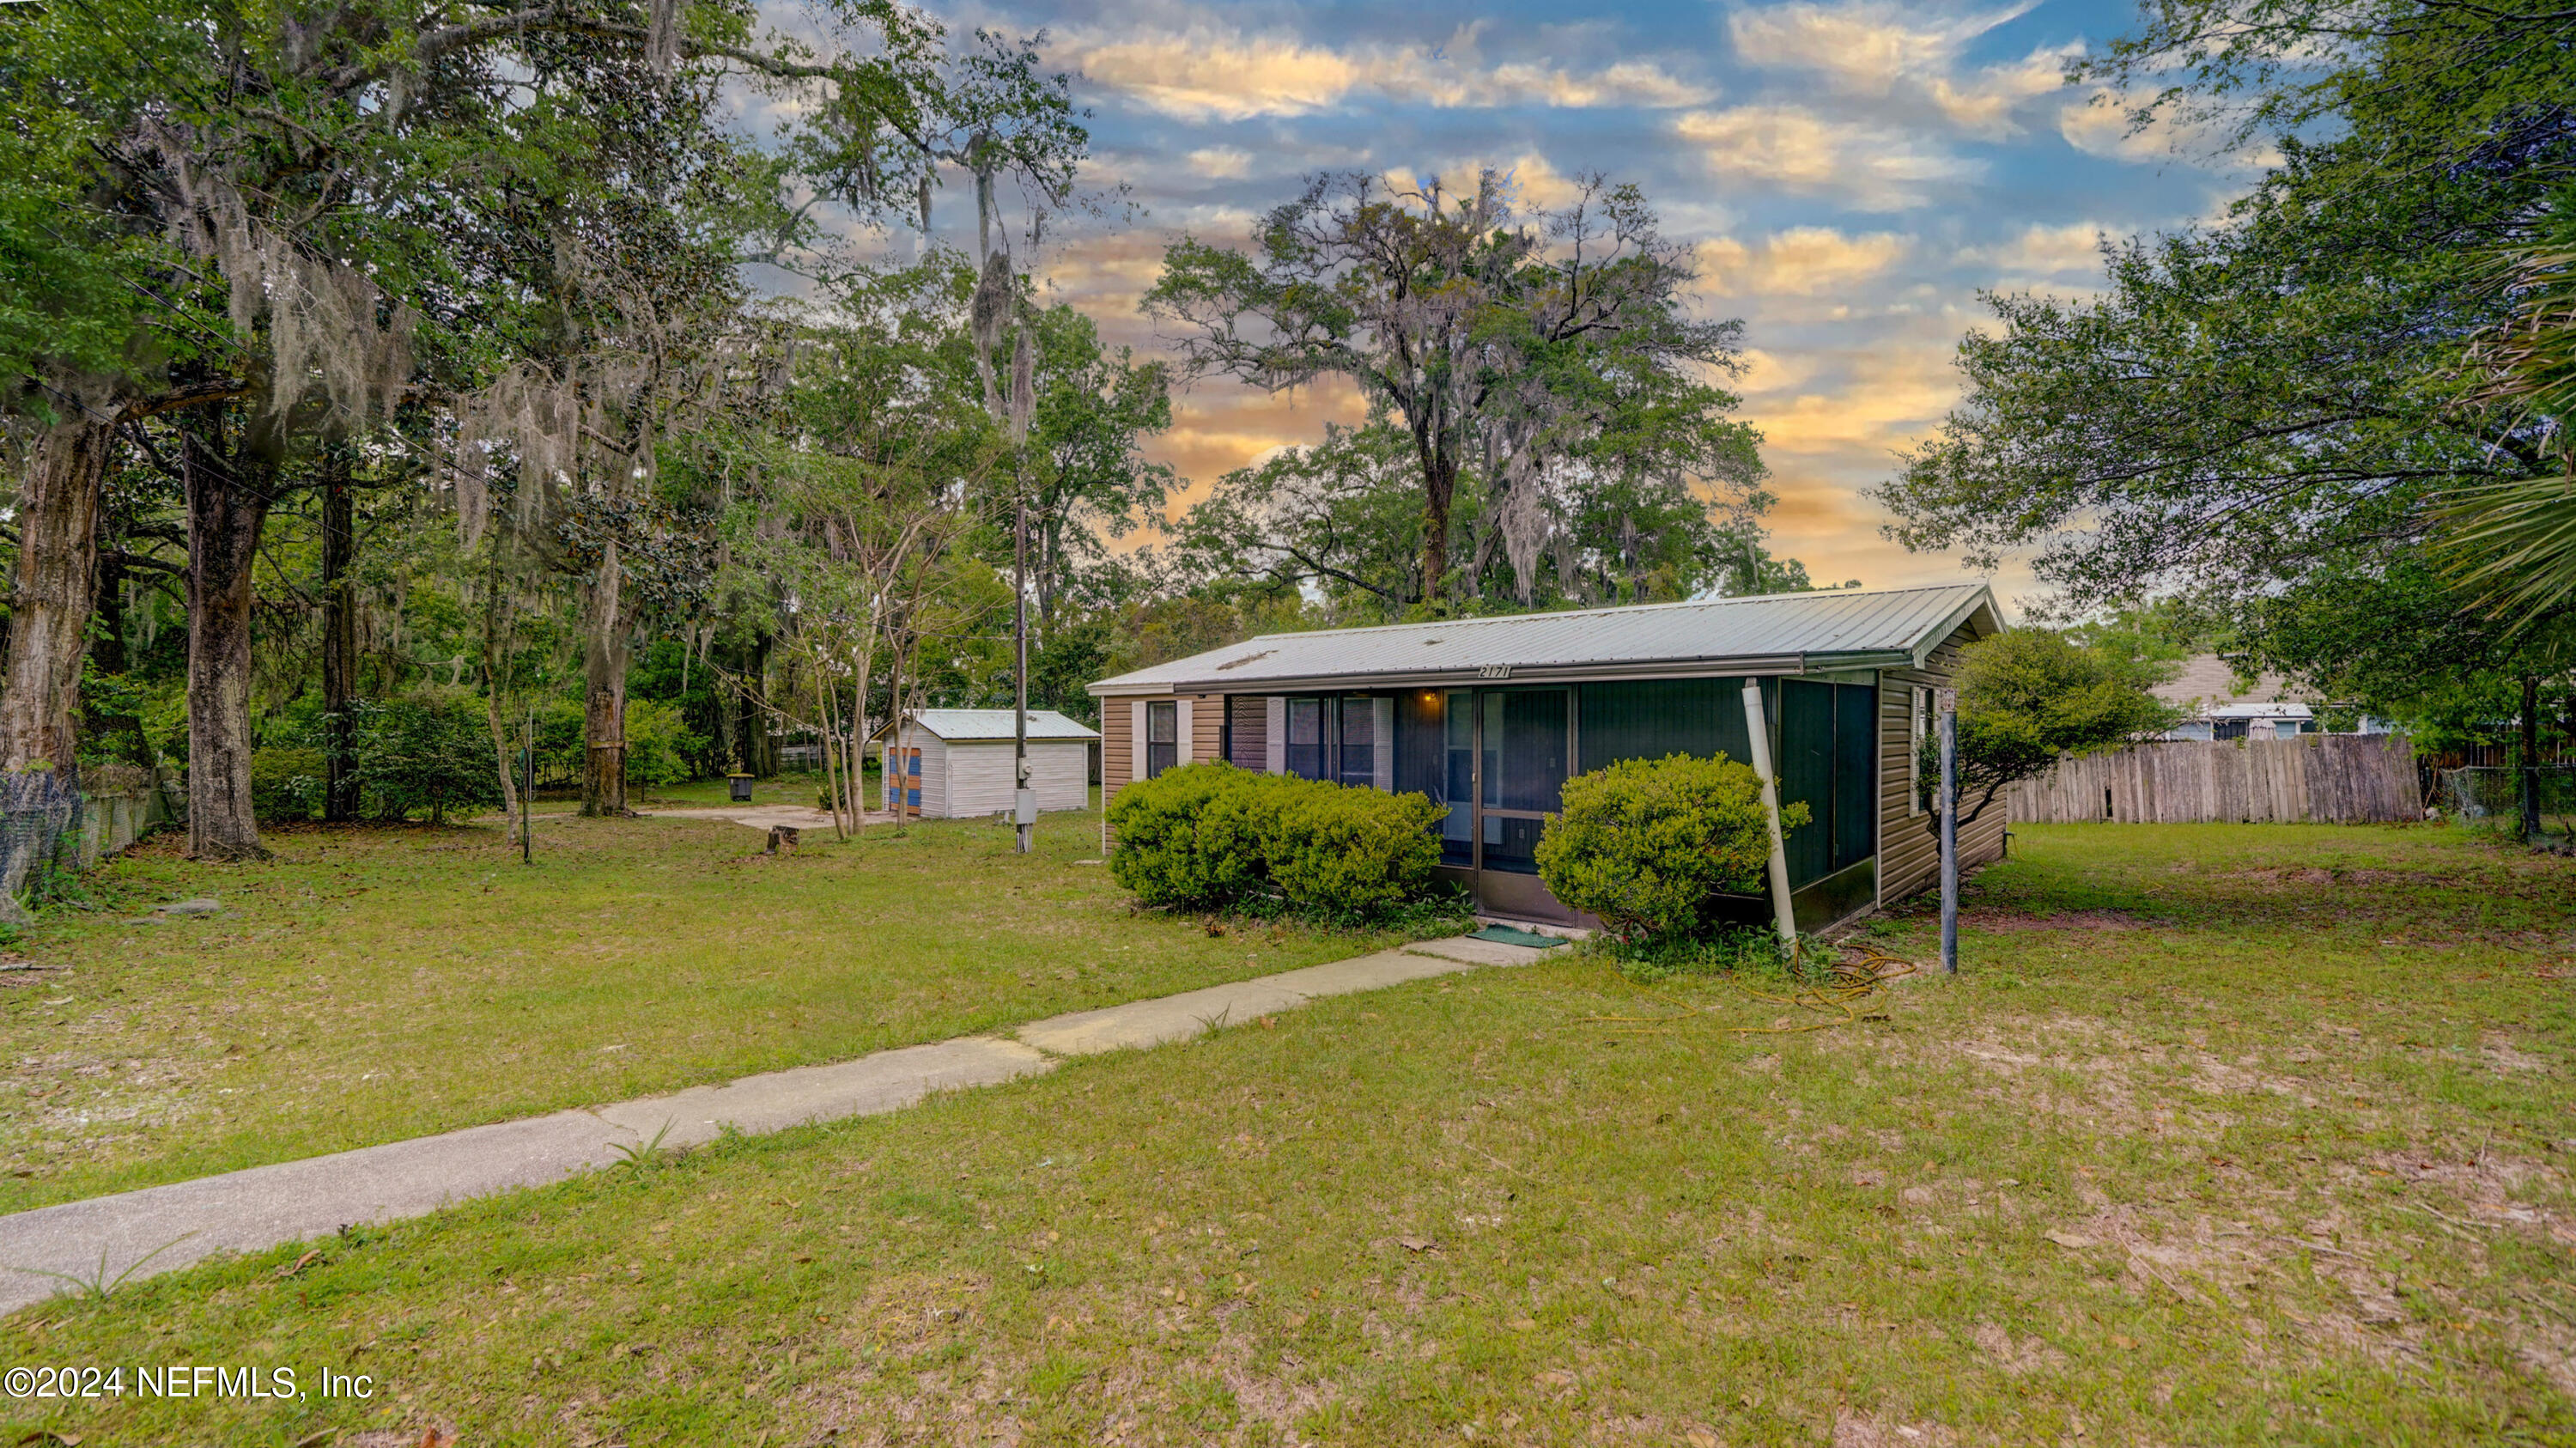 Jacksonville, FL home for sale located at 2171 4th Avenue, Jacksonville, FL 32208